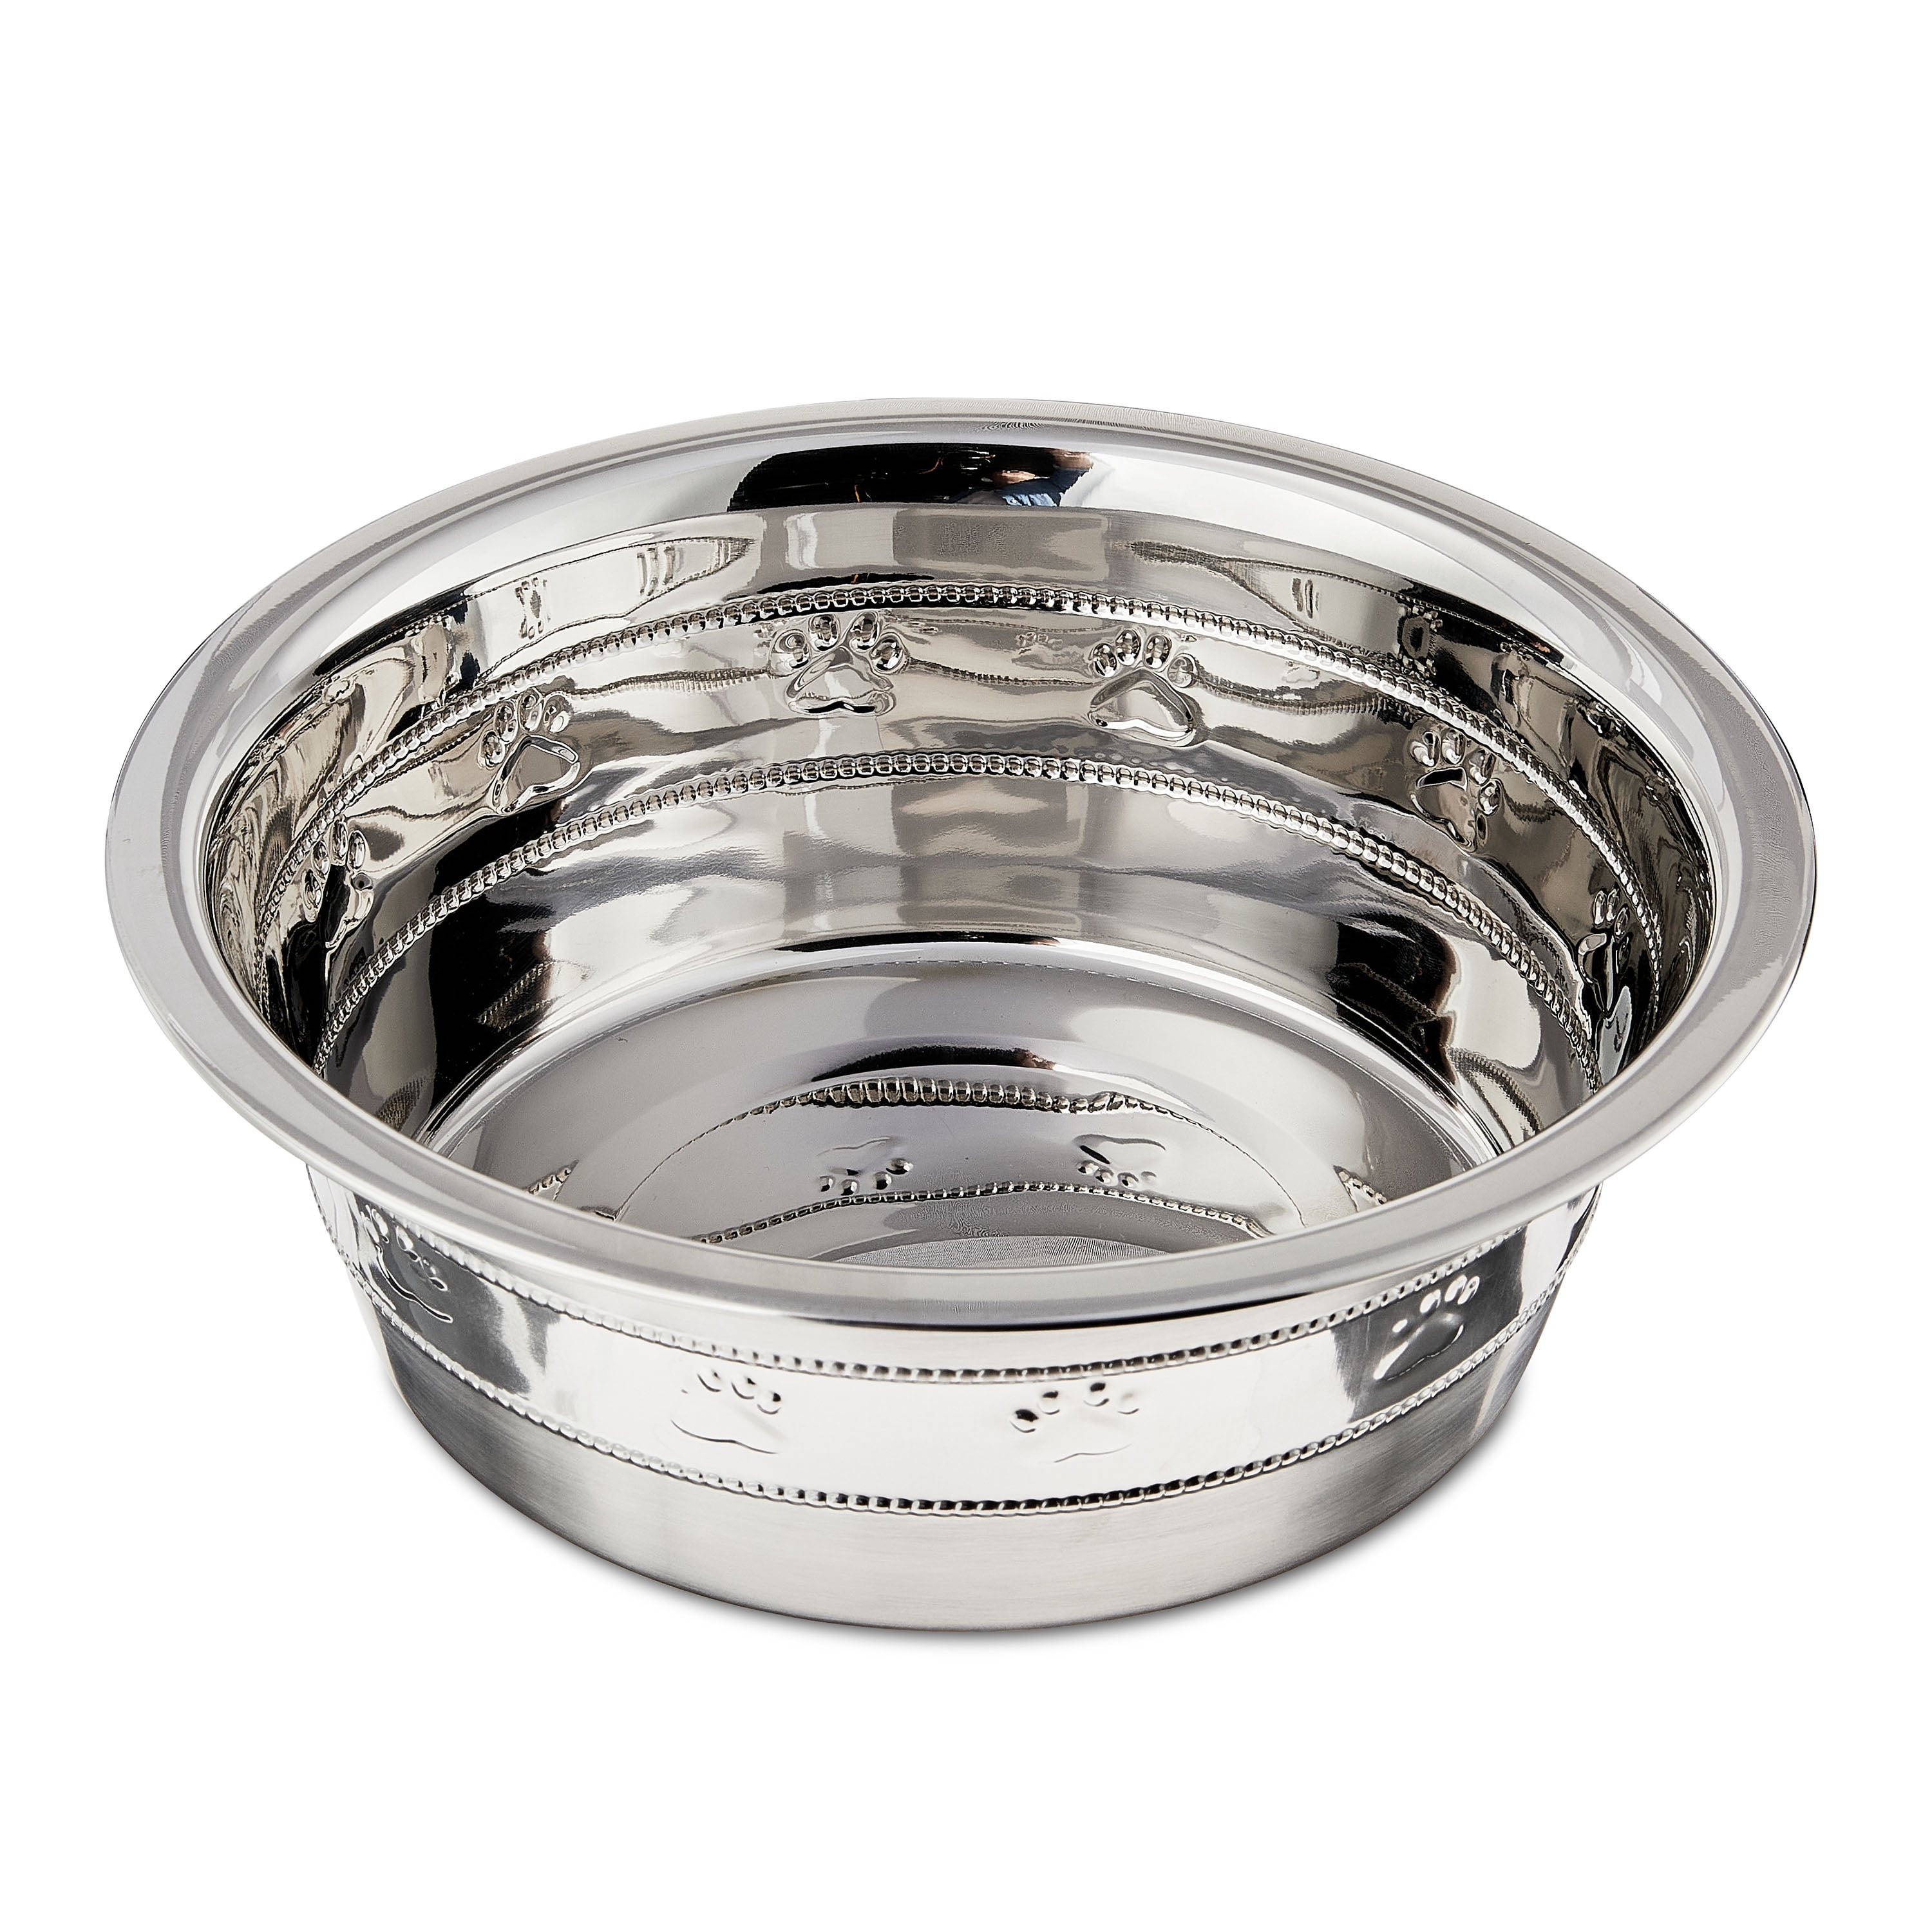 Pet Supplies : Zhehao 2 Pcs Extra Large Dog Water Bowl Stainless Steel Dog  Bowls High Capacity Metal Dog Food Bowls for Large X Large and Huge Dogs  Indoor and Outdoor Use